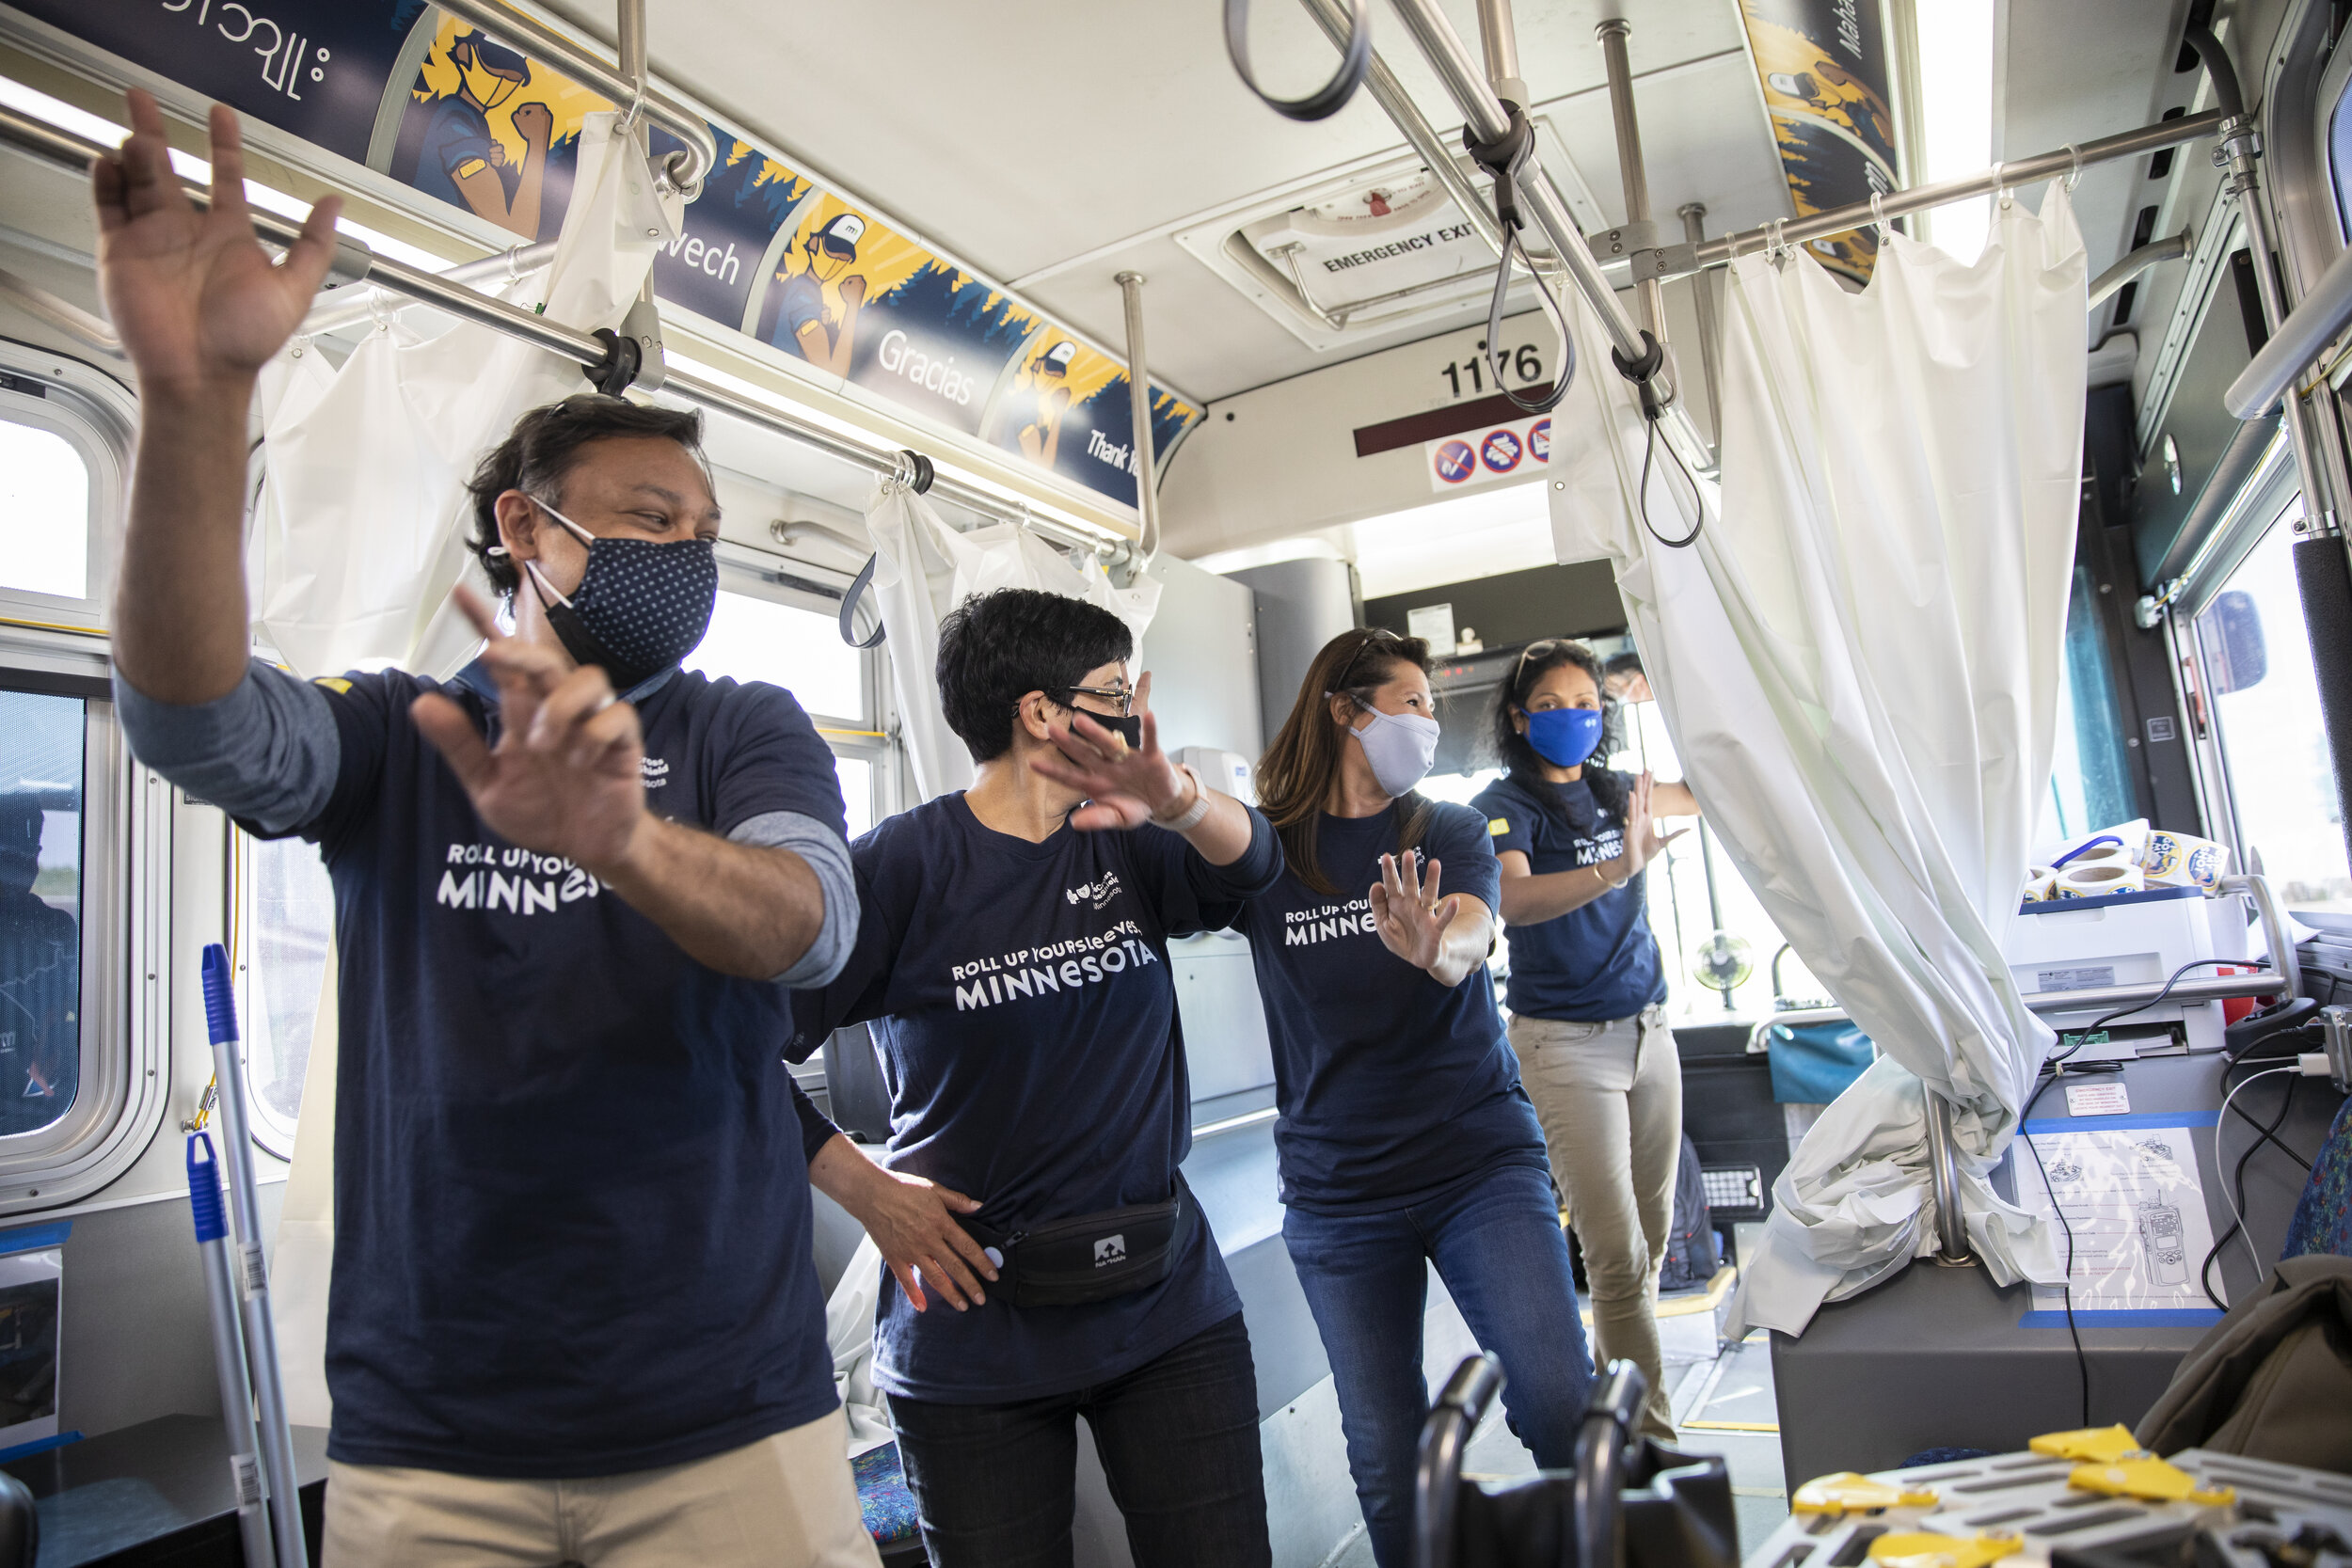  Blue Cross and Blue Shield of Minnesota staff volunteers dance together aboard the mobile Covid-19 vaccine clinic to celebrate their day of work. (Liam James Doyle for The New York Times) 